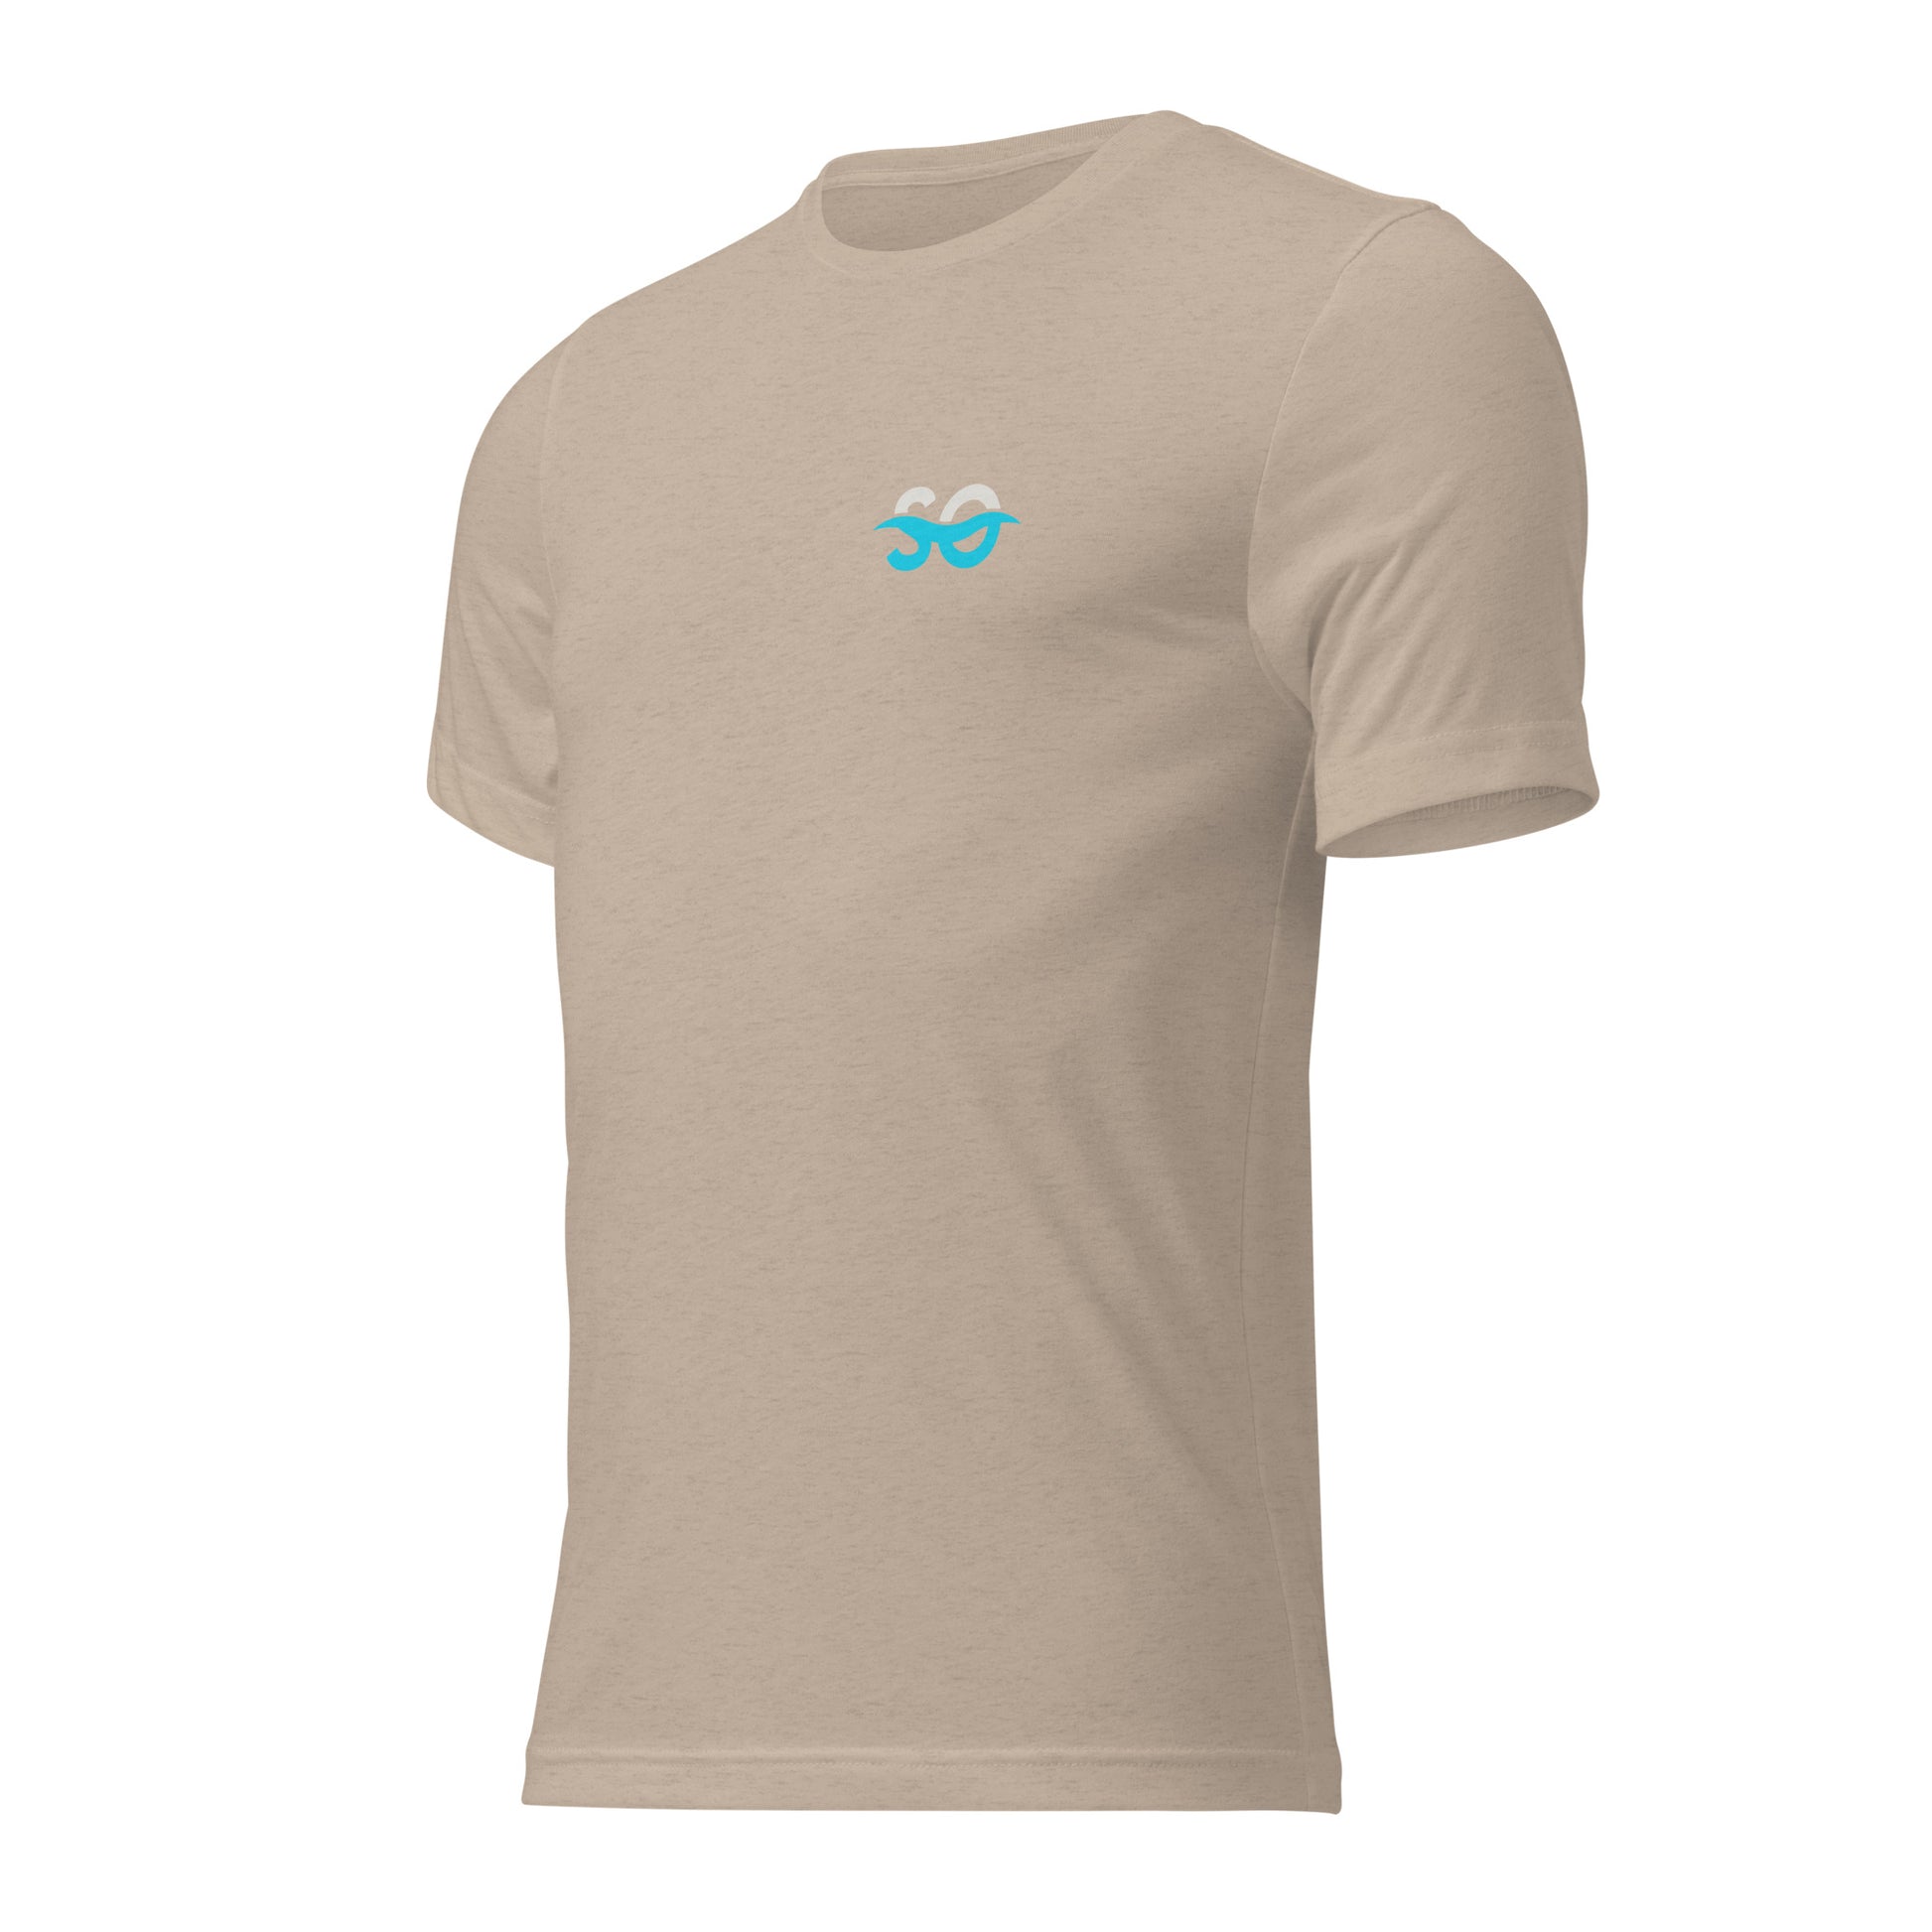 a tan t - shirt with a blue logo on the chest